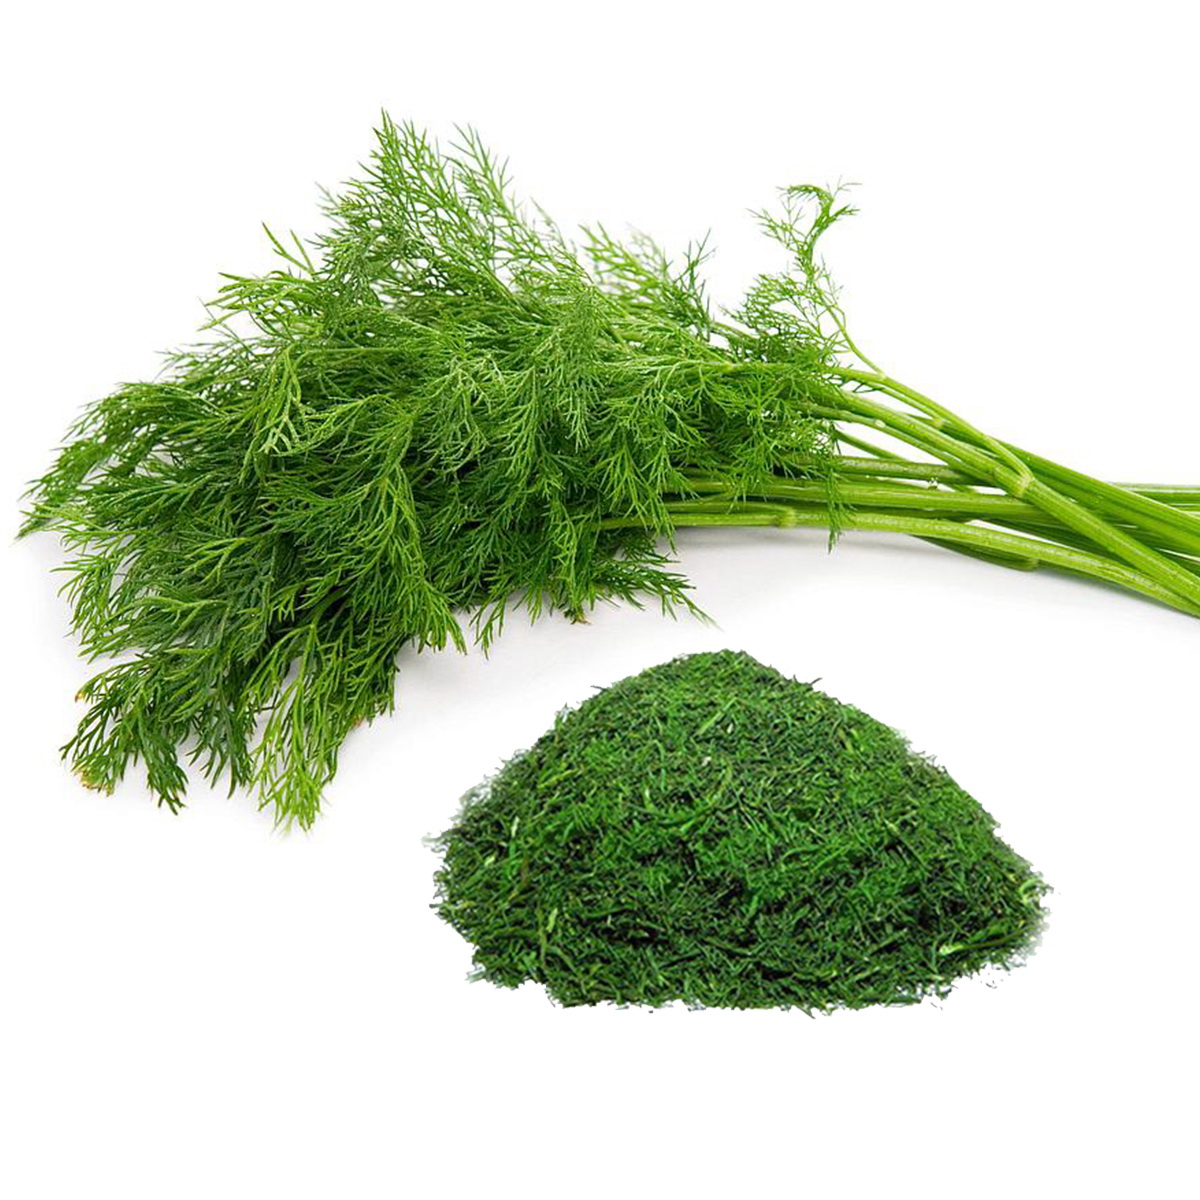 Dried - dill